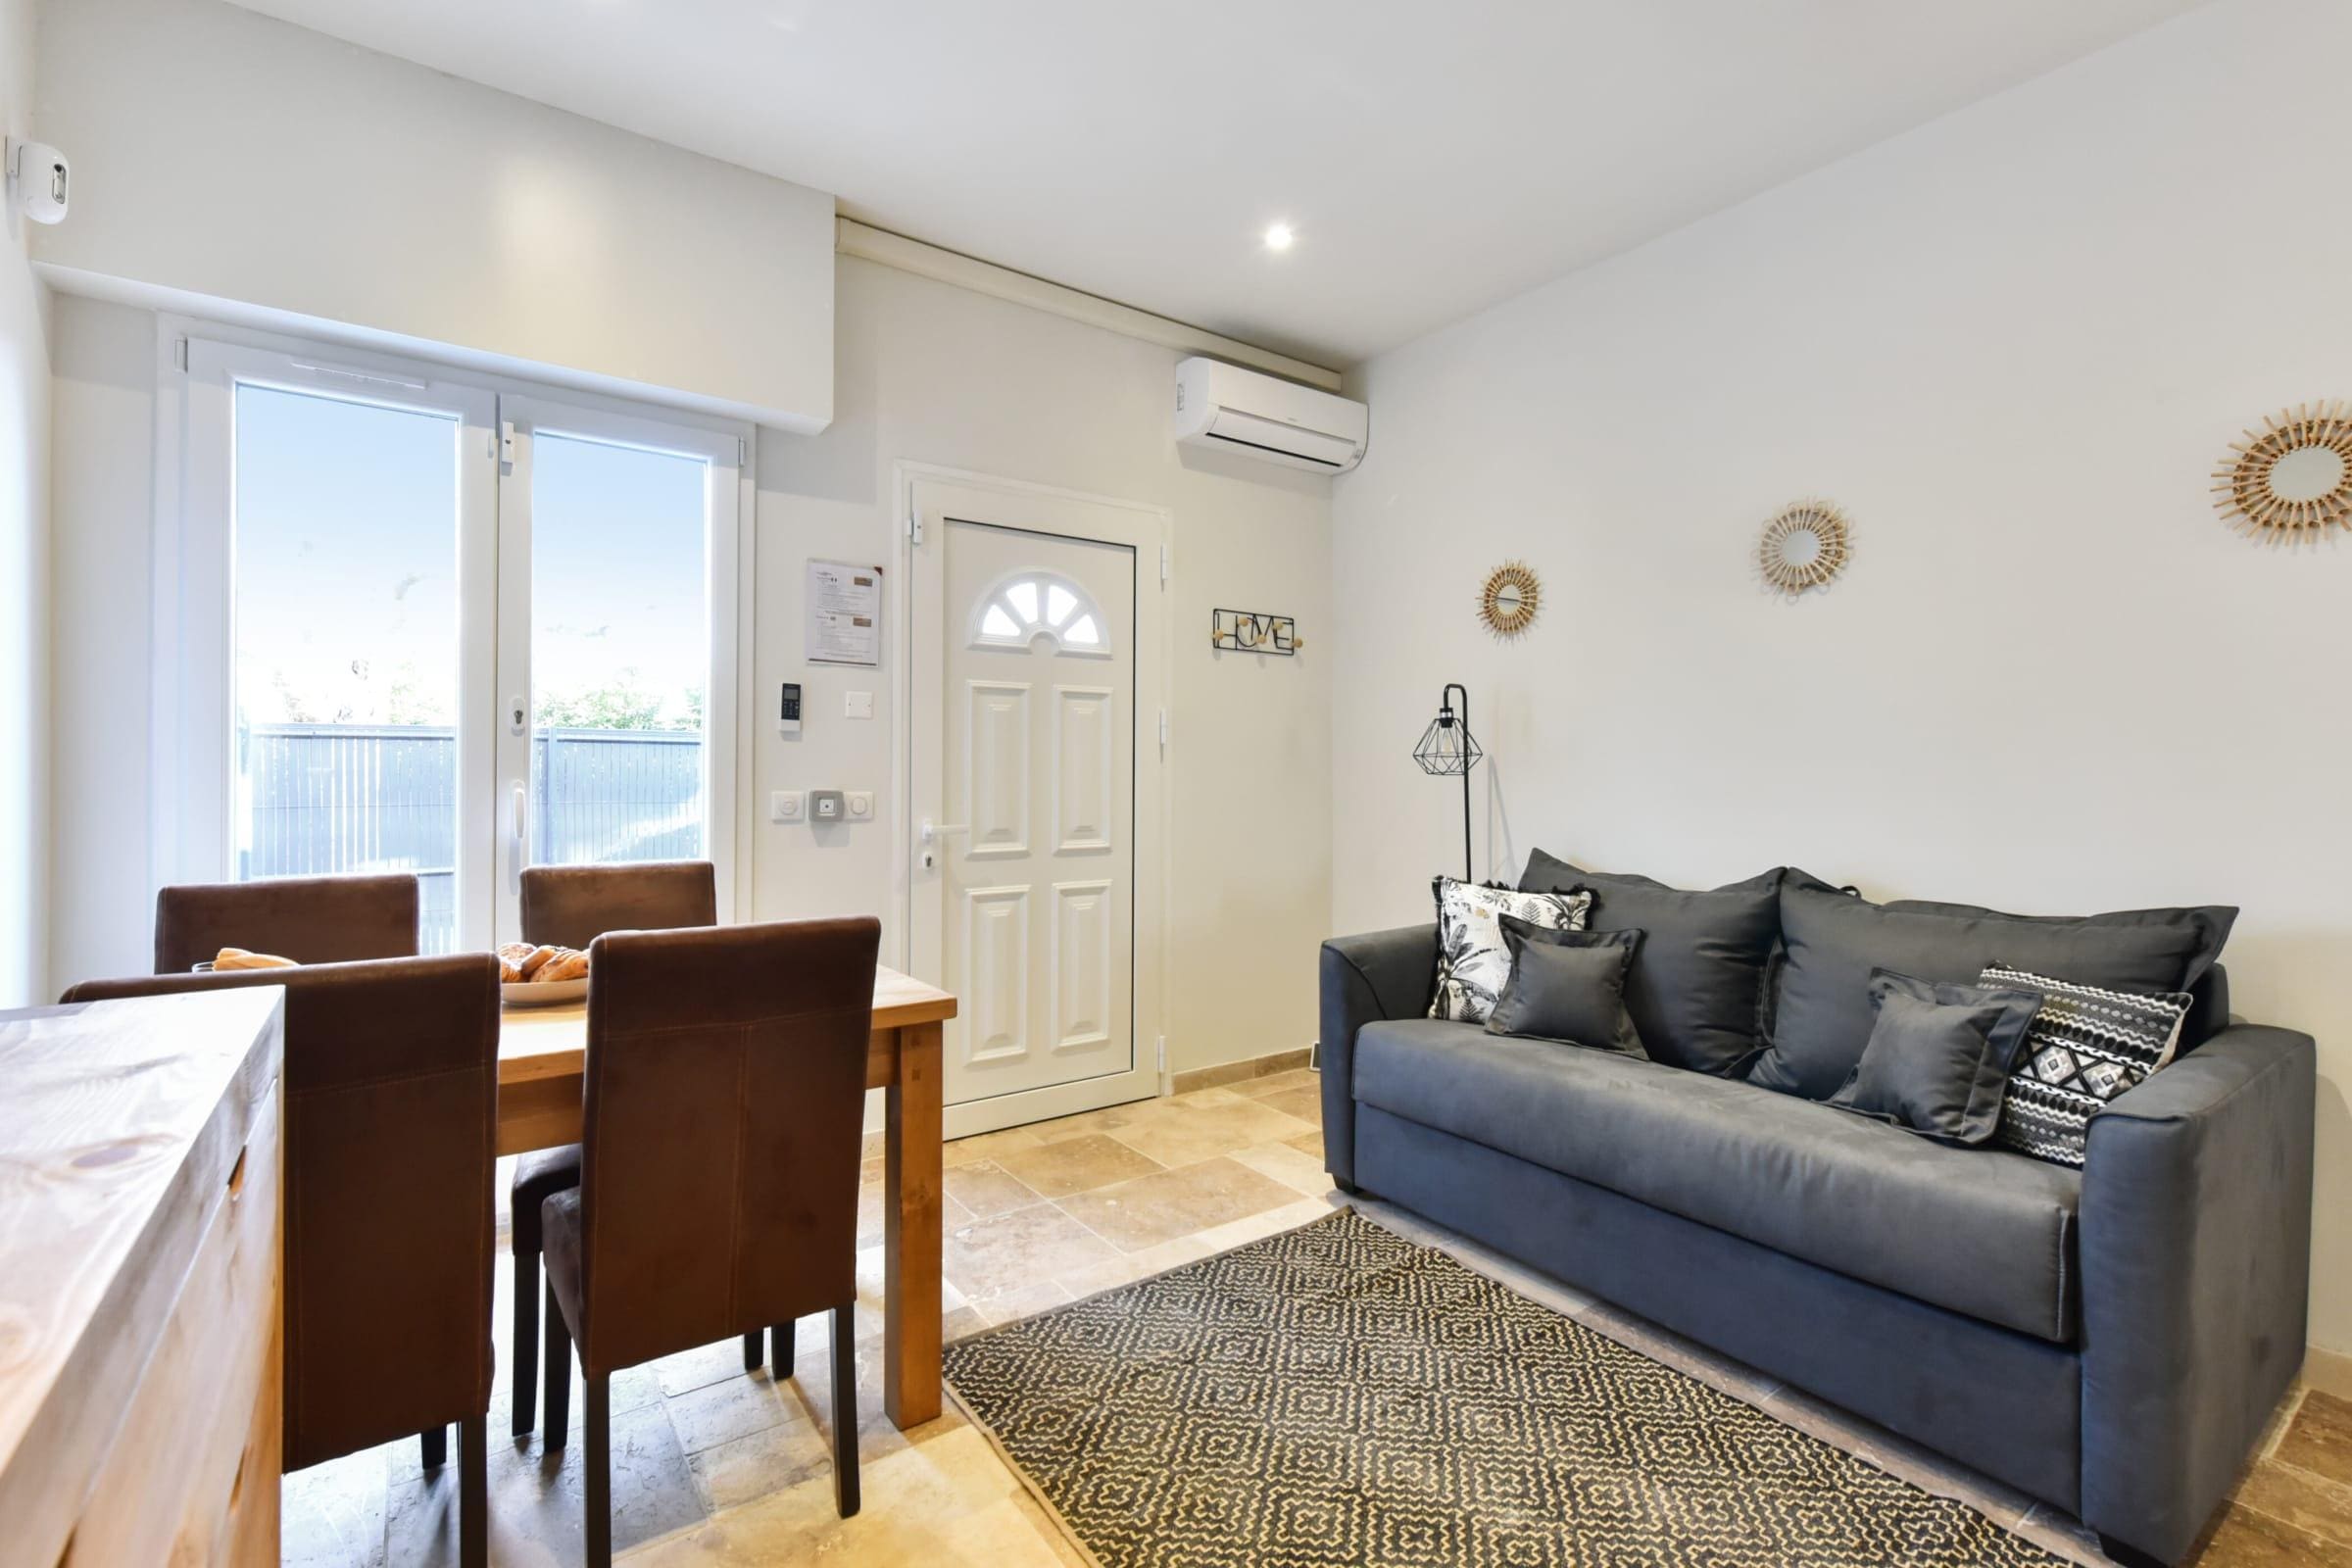 Property Image 1 - Bright flat, a few minutes to the beach, close to Marineland Antibes